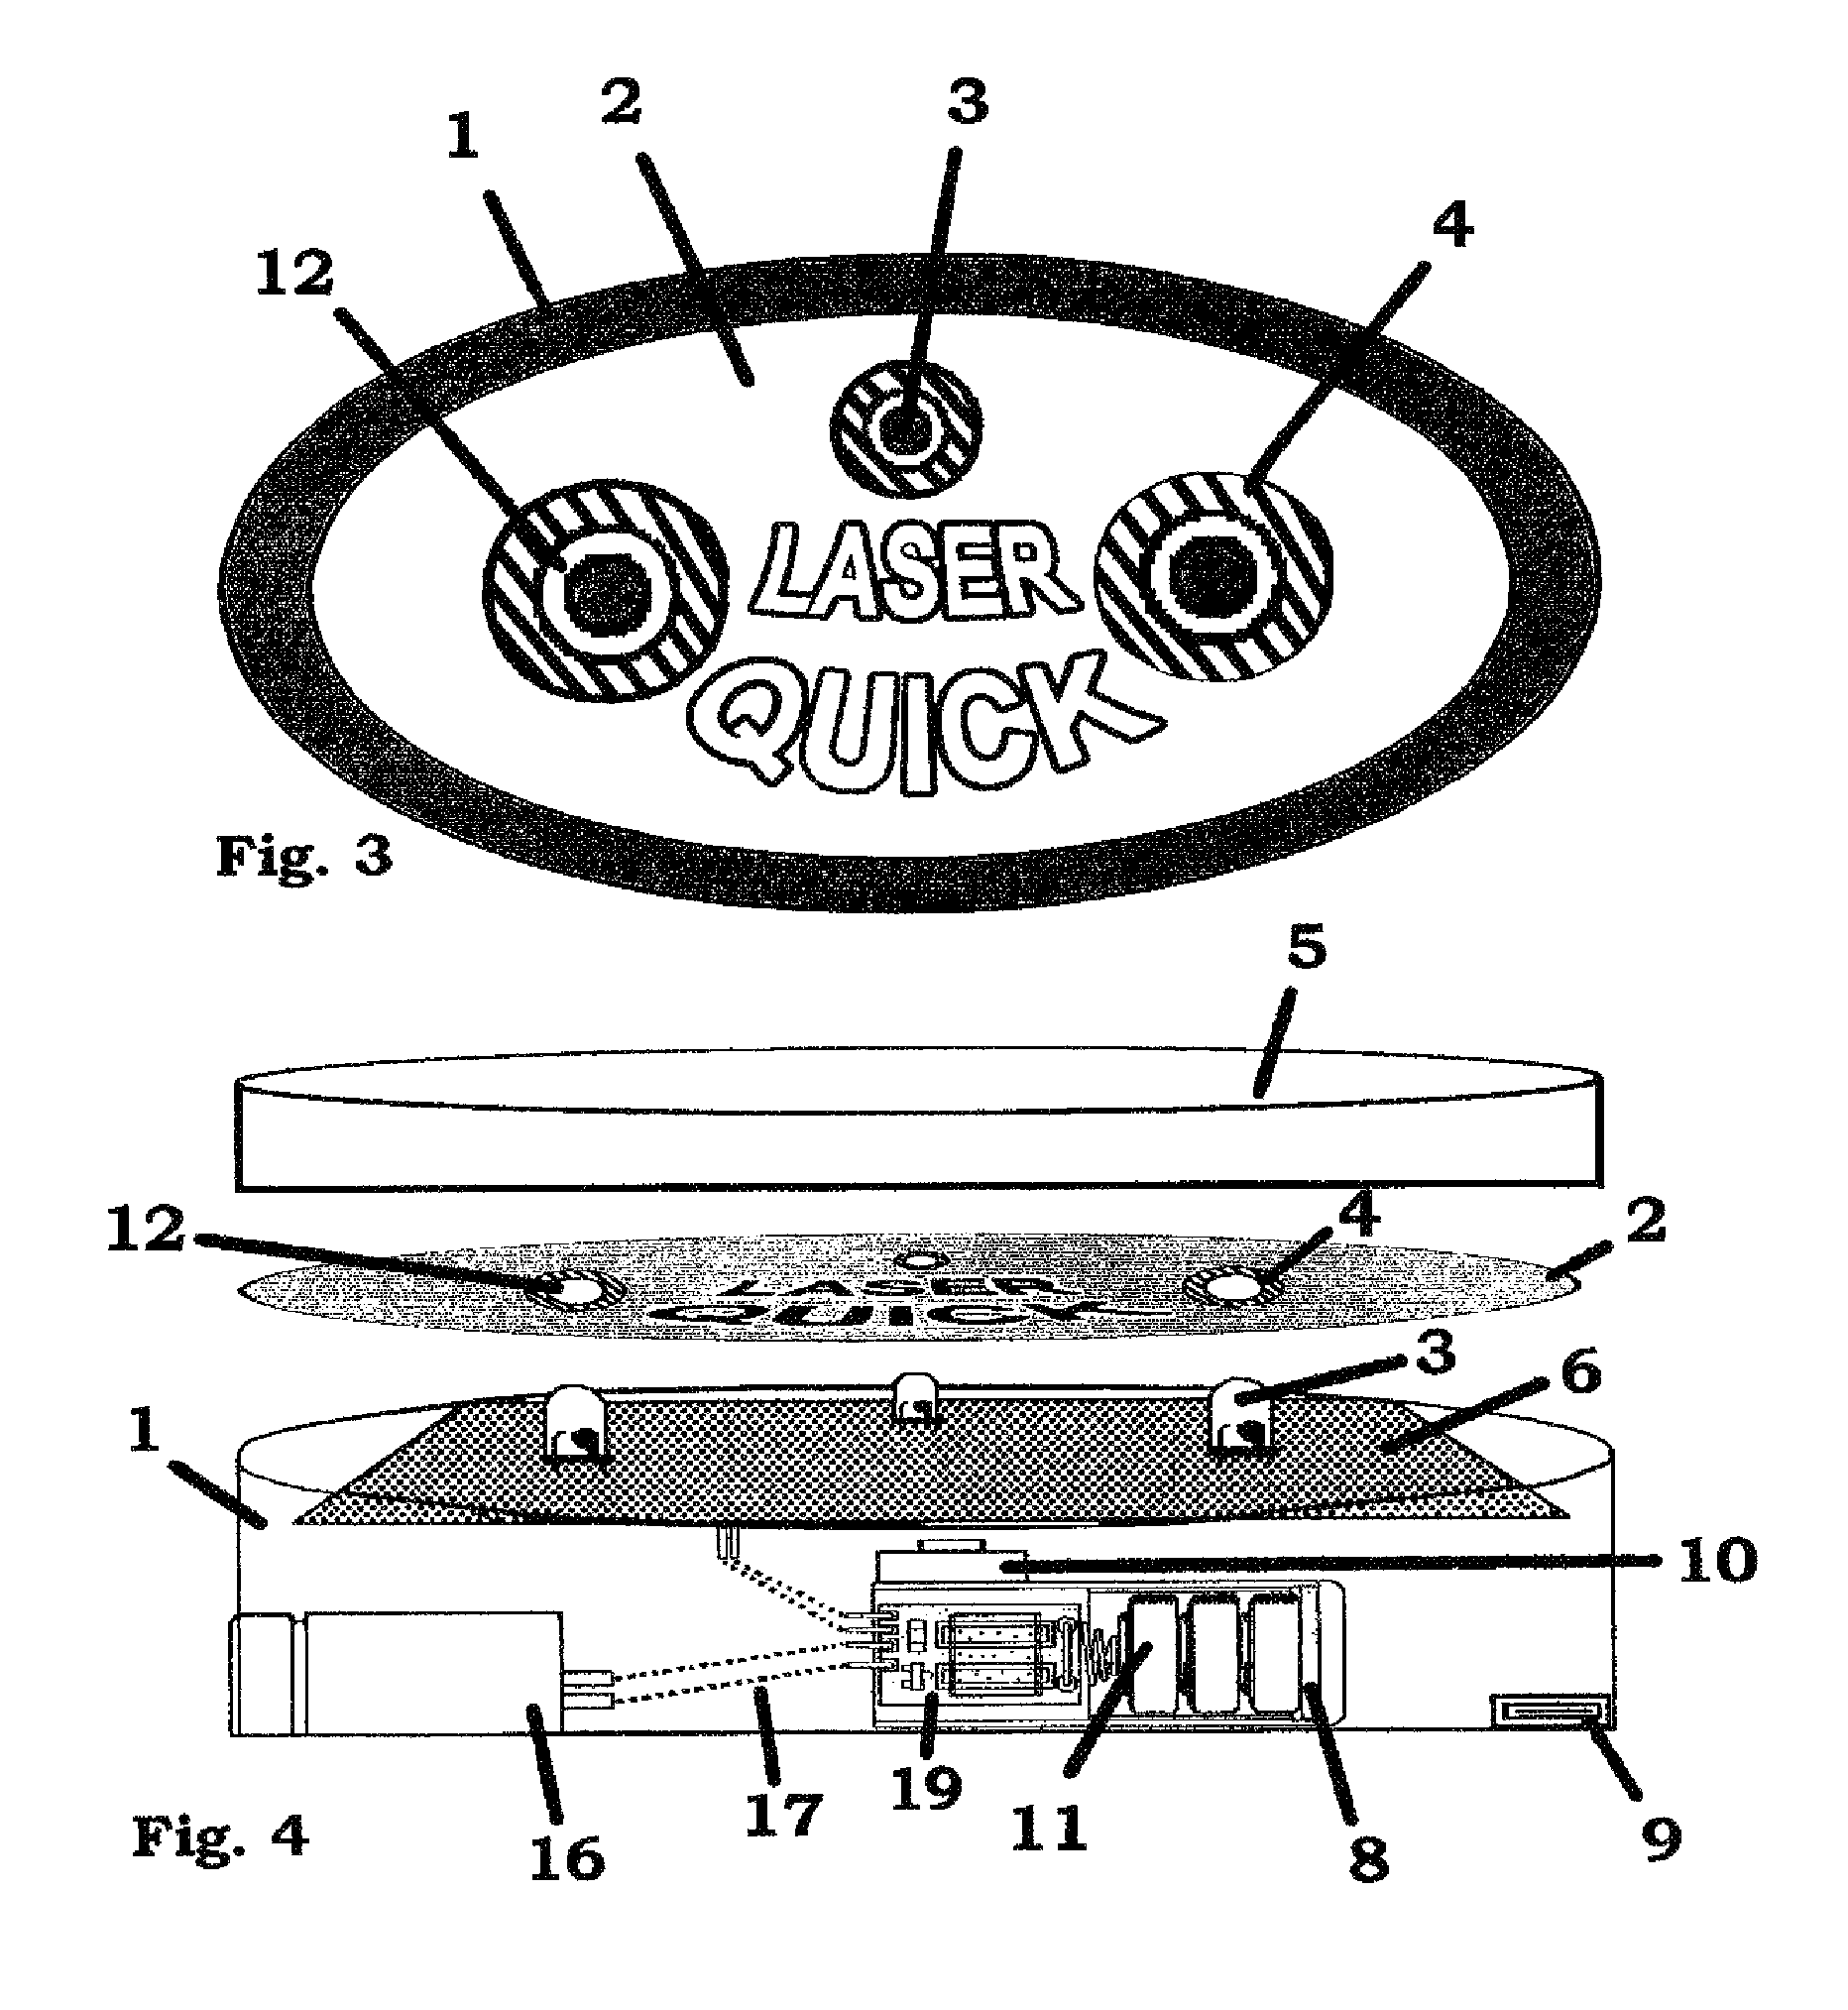 Projected scanning laser device and method for locating small objects